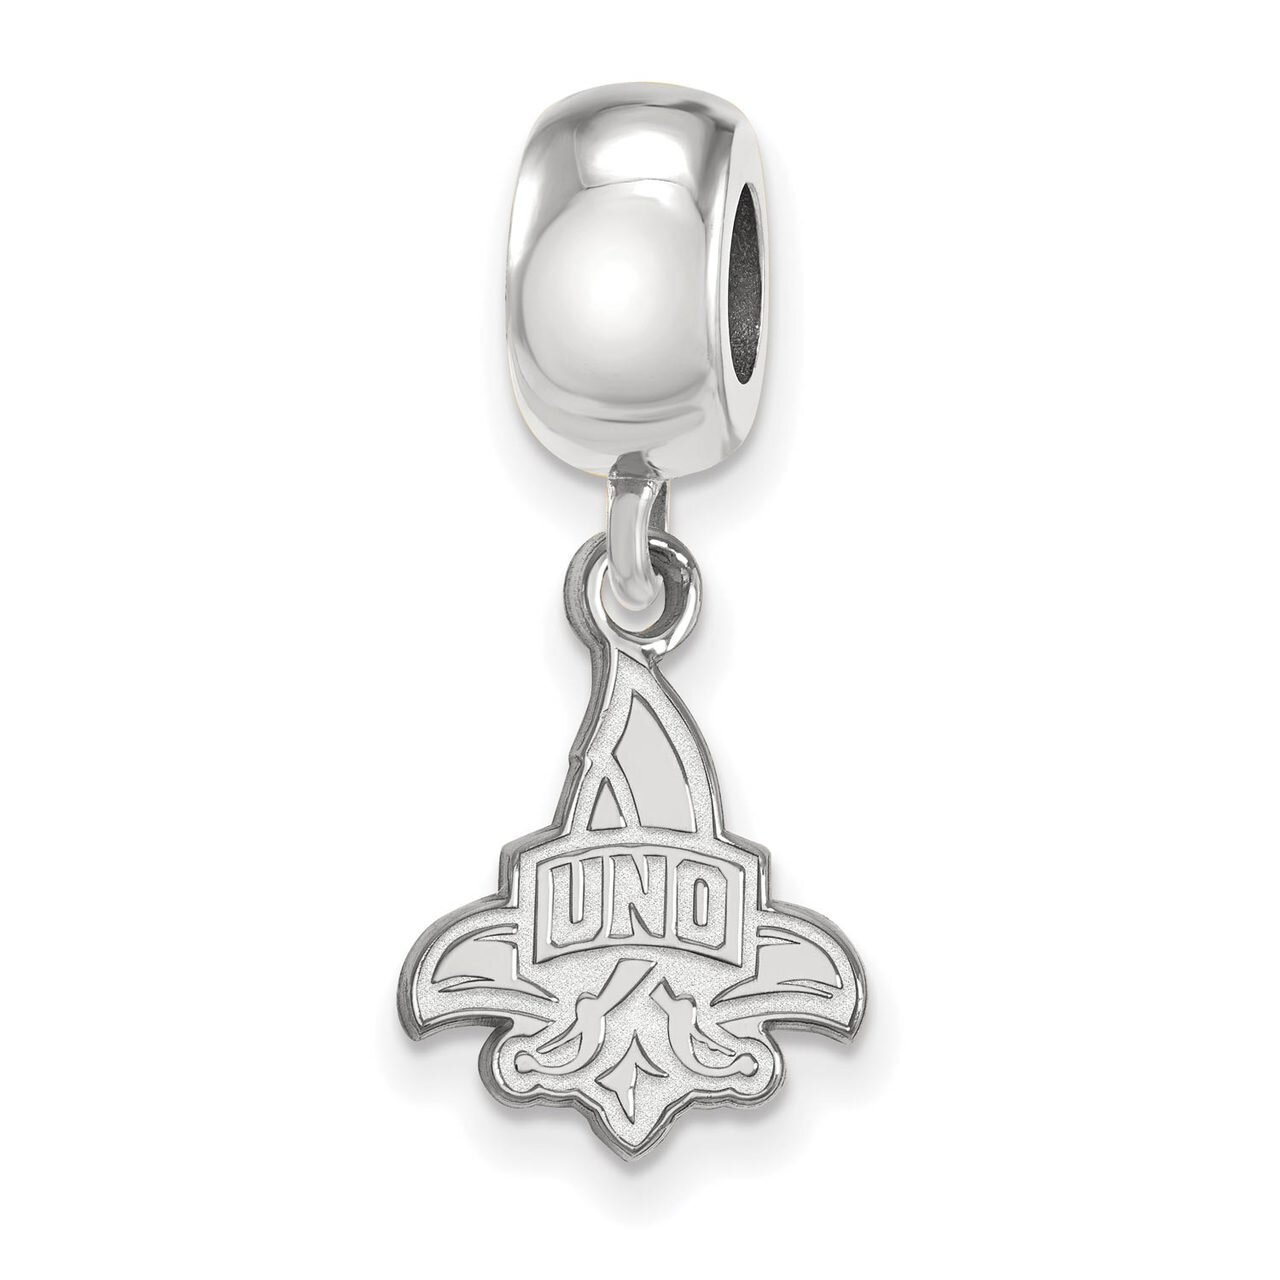 University of New Orleans Bead Charm Small Dangle Sterling Silver SS016UNO